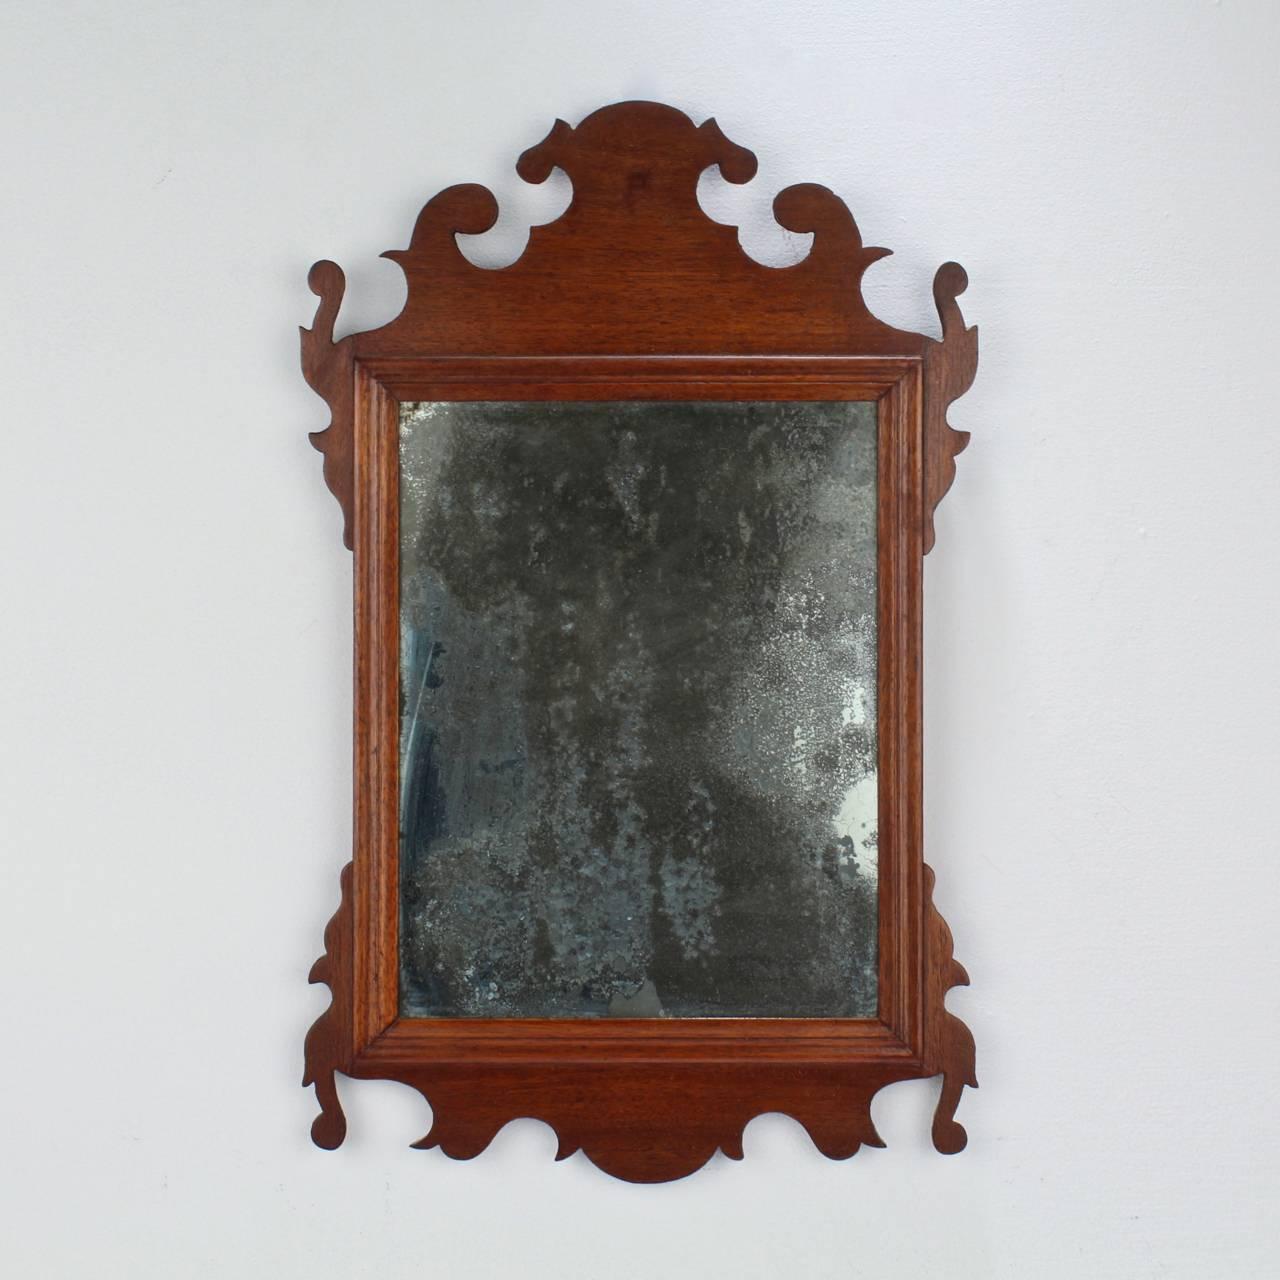 A Fine and diminutive period Chippendale mahogany mirror or looking glass. 

American or English.

Found just outside Philadelphia. 

Retains an old glass with losses to much of the original silvering.

Measures: Height ca. 18 in.

Items